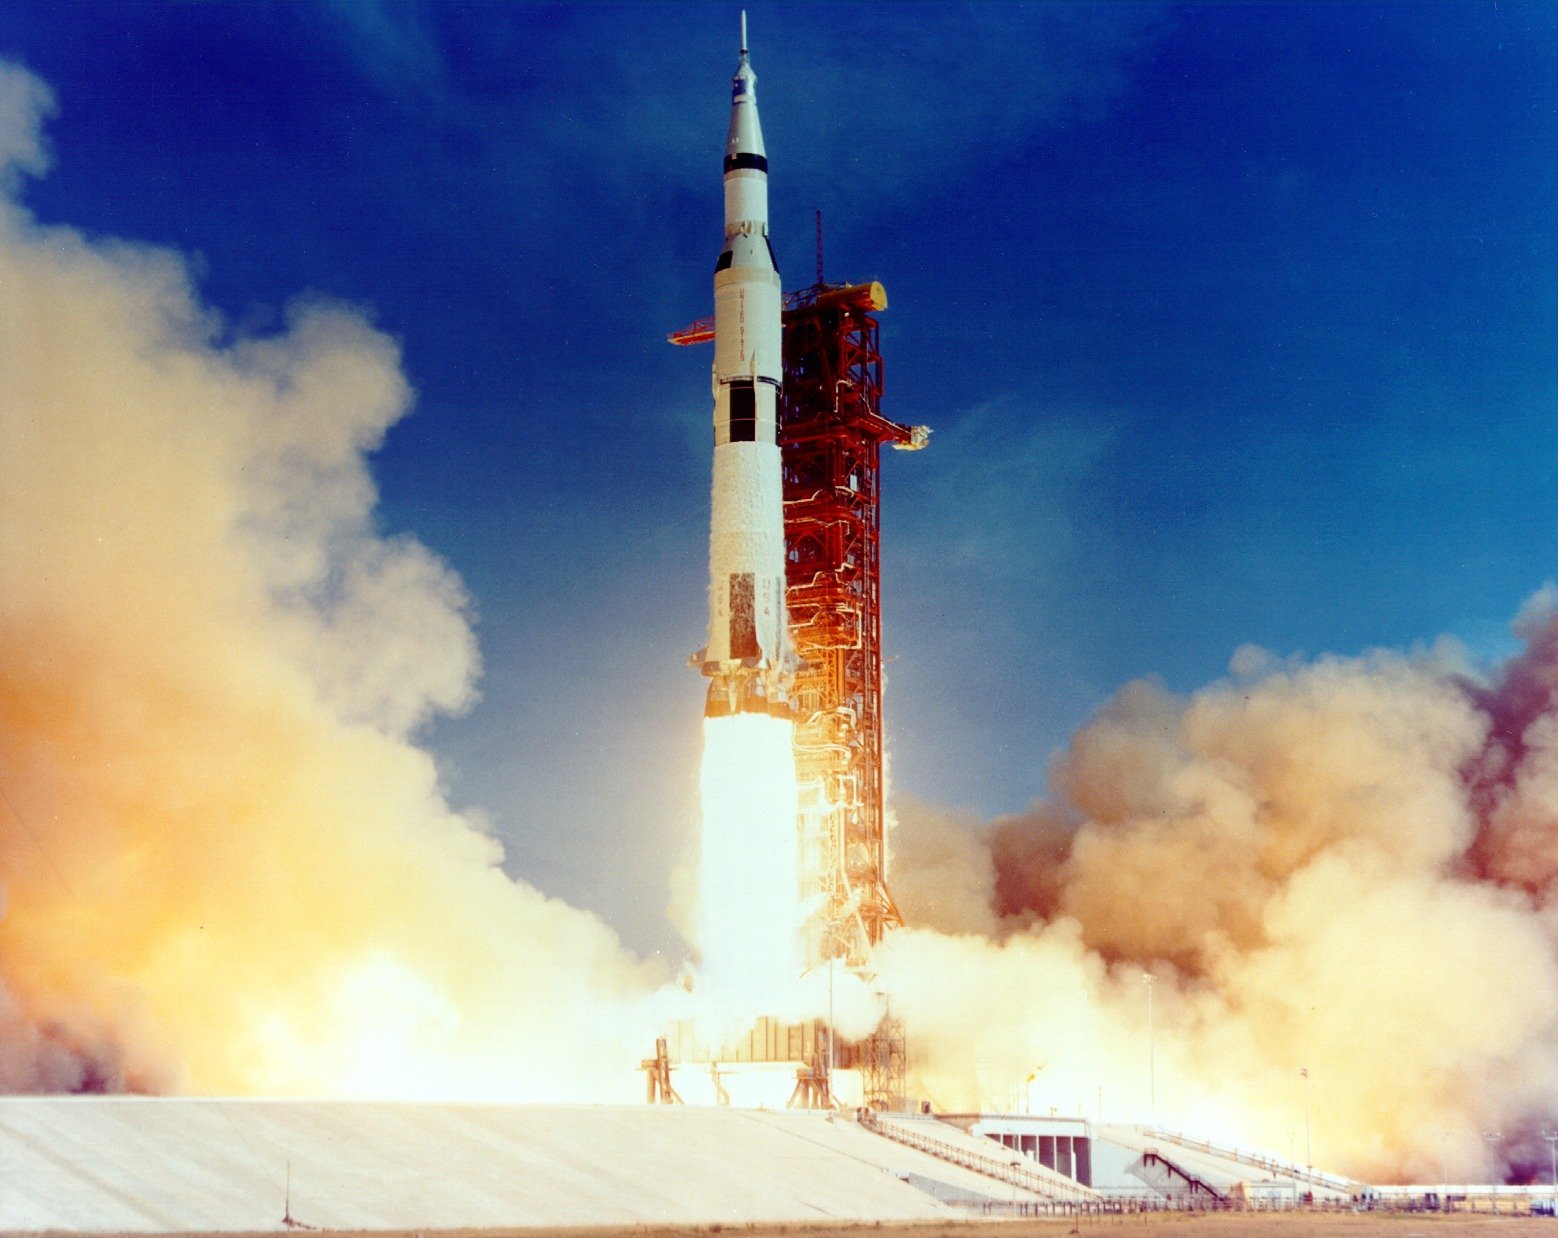 Saturn V vehicle carrying Apollo 11 mission to the Moon gets launched at the Kennedy Space Center on July 16, 1969.